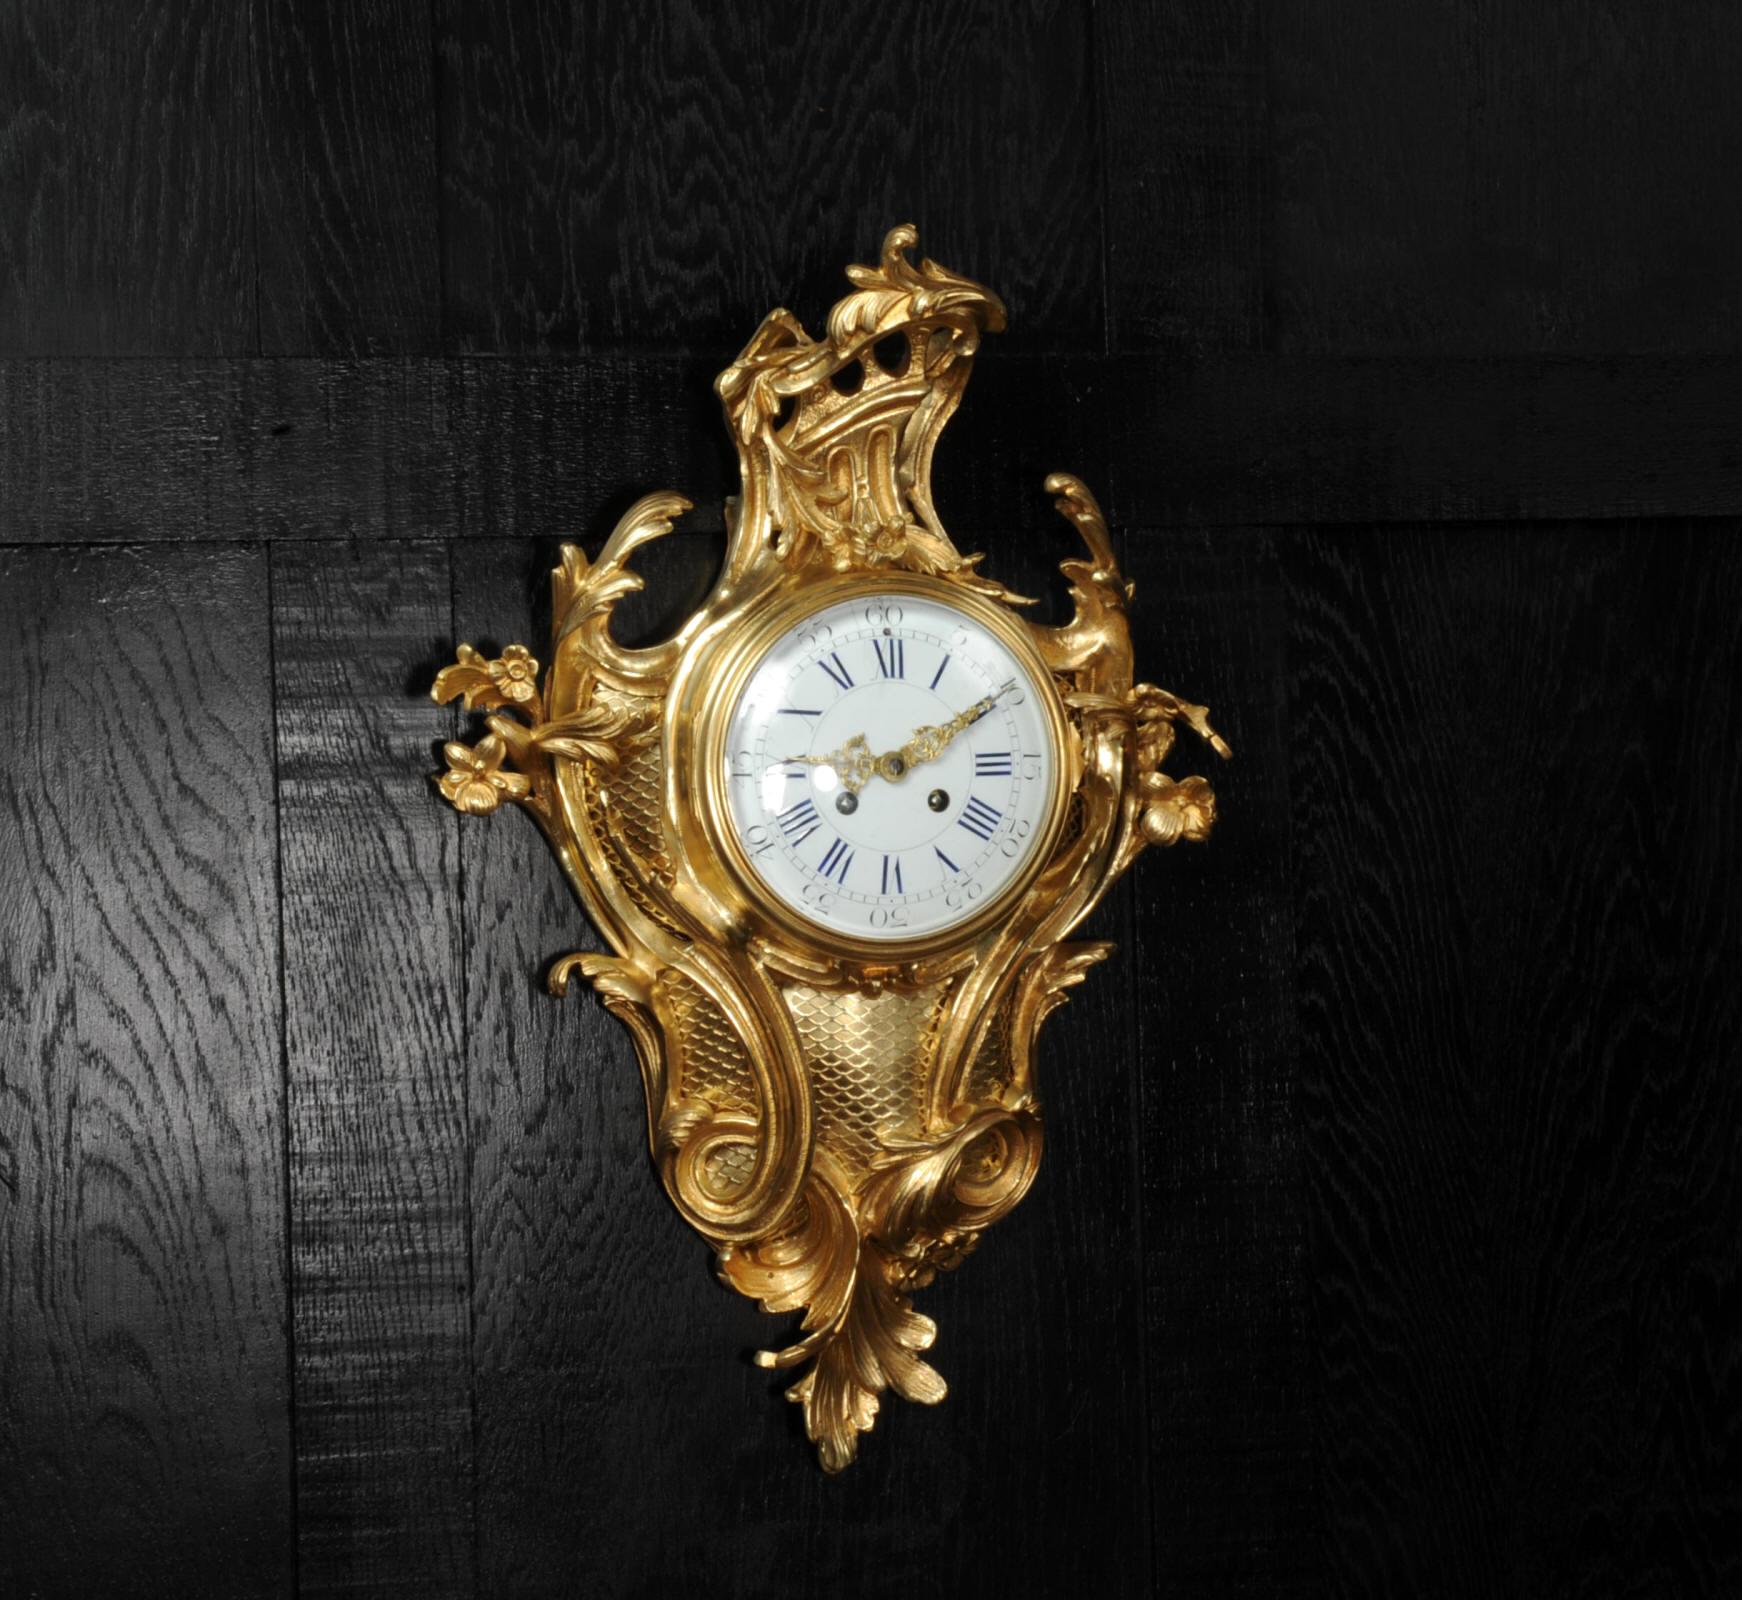 A large and stunning original antique French Cartel Wall clock in finely gilded bronze, dating from around 1880. Elegantly designed in the Rococo style of Louis XV, it is formed of bold, scrolling acanthus mounted with upward scrolling flowers.